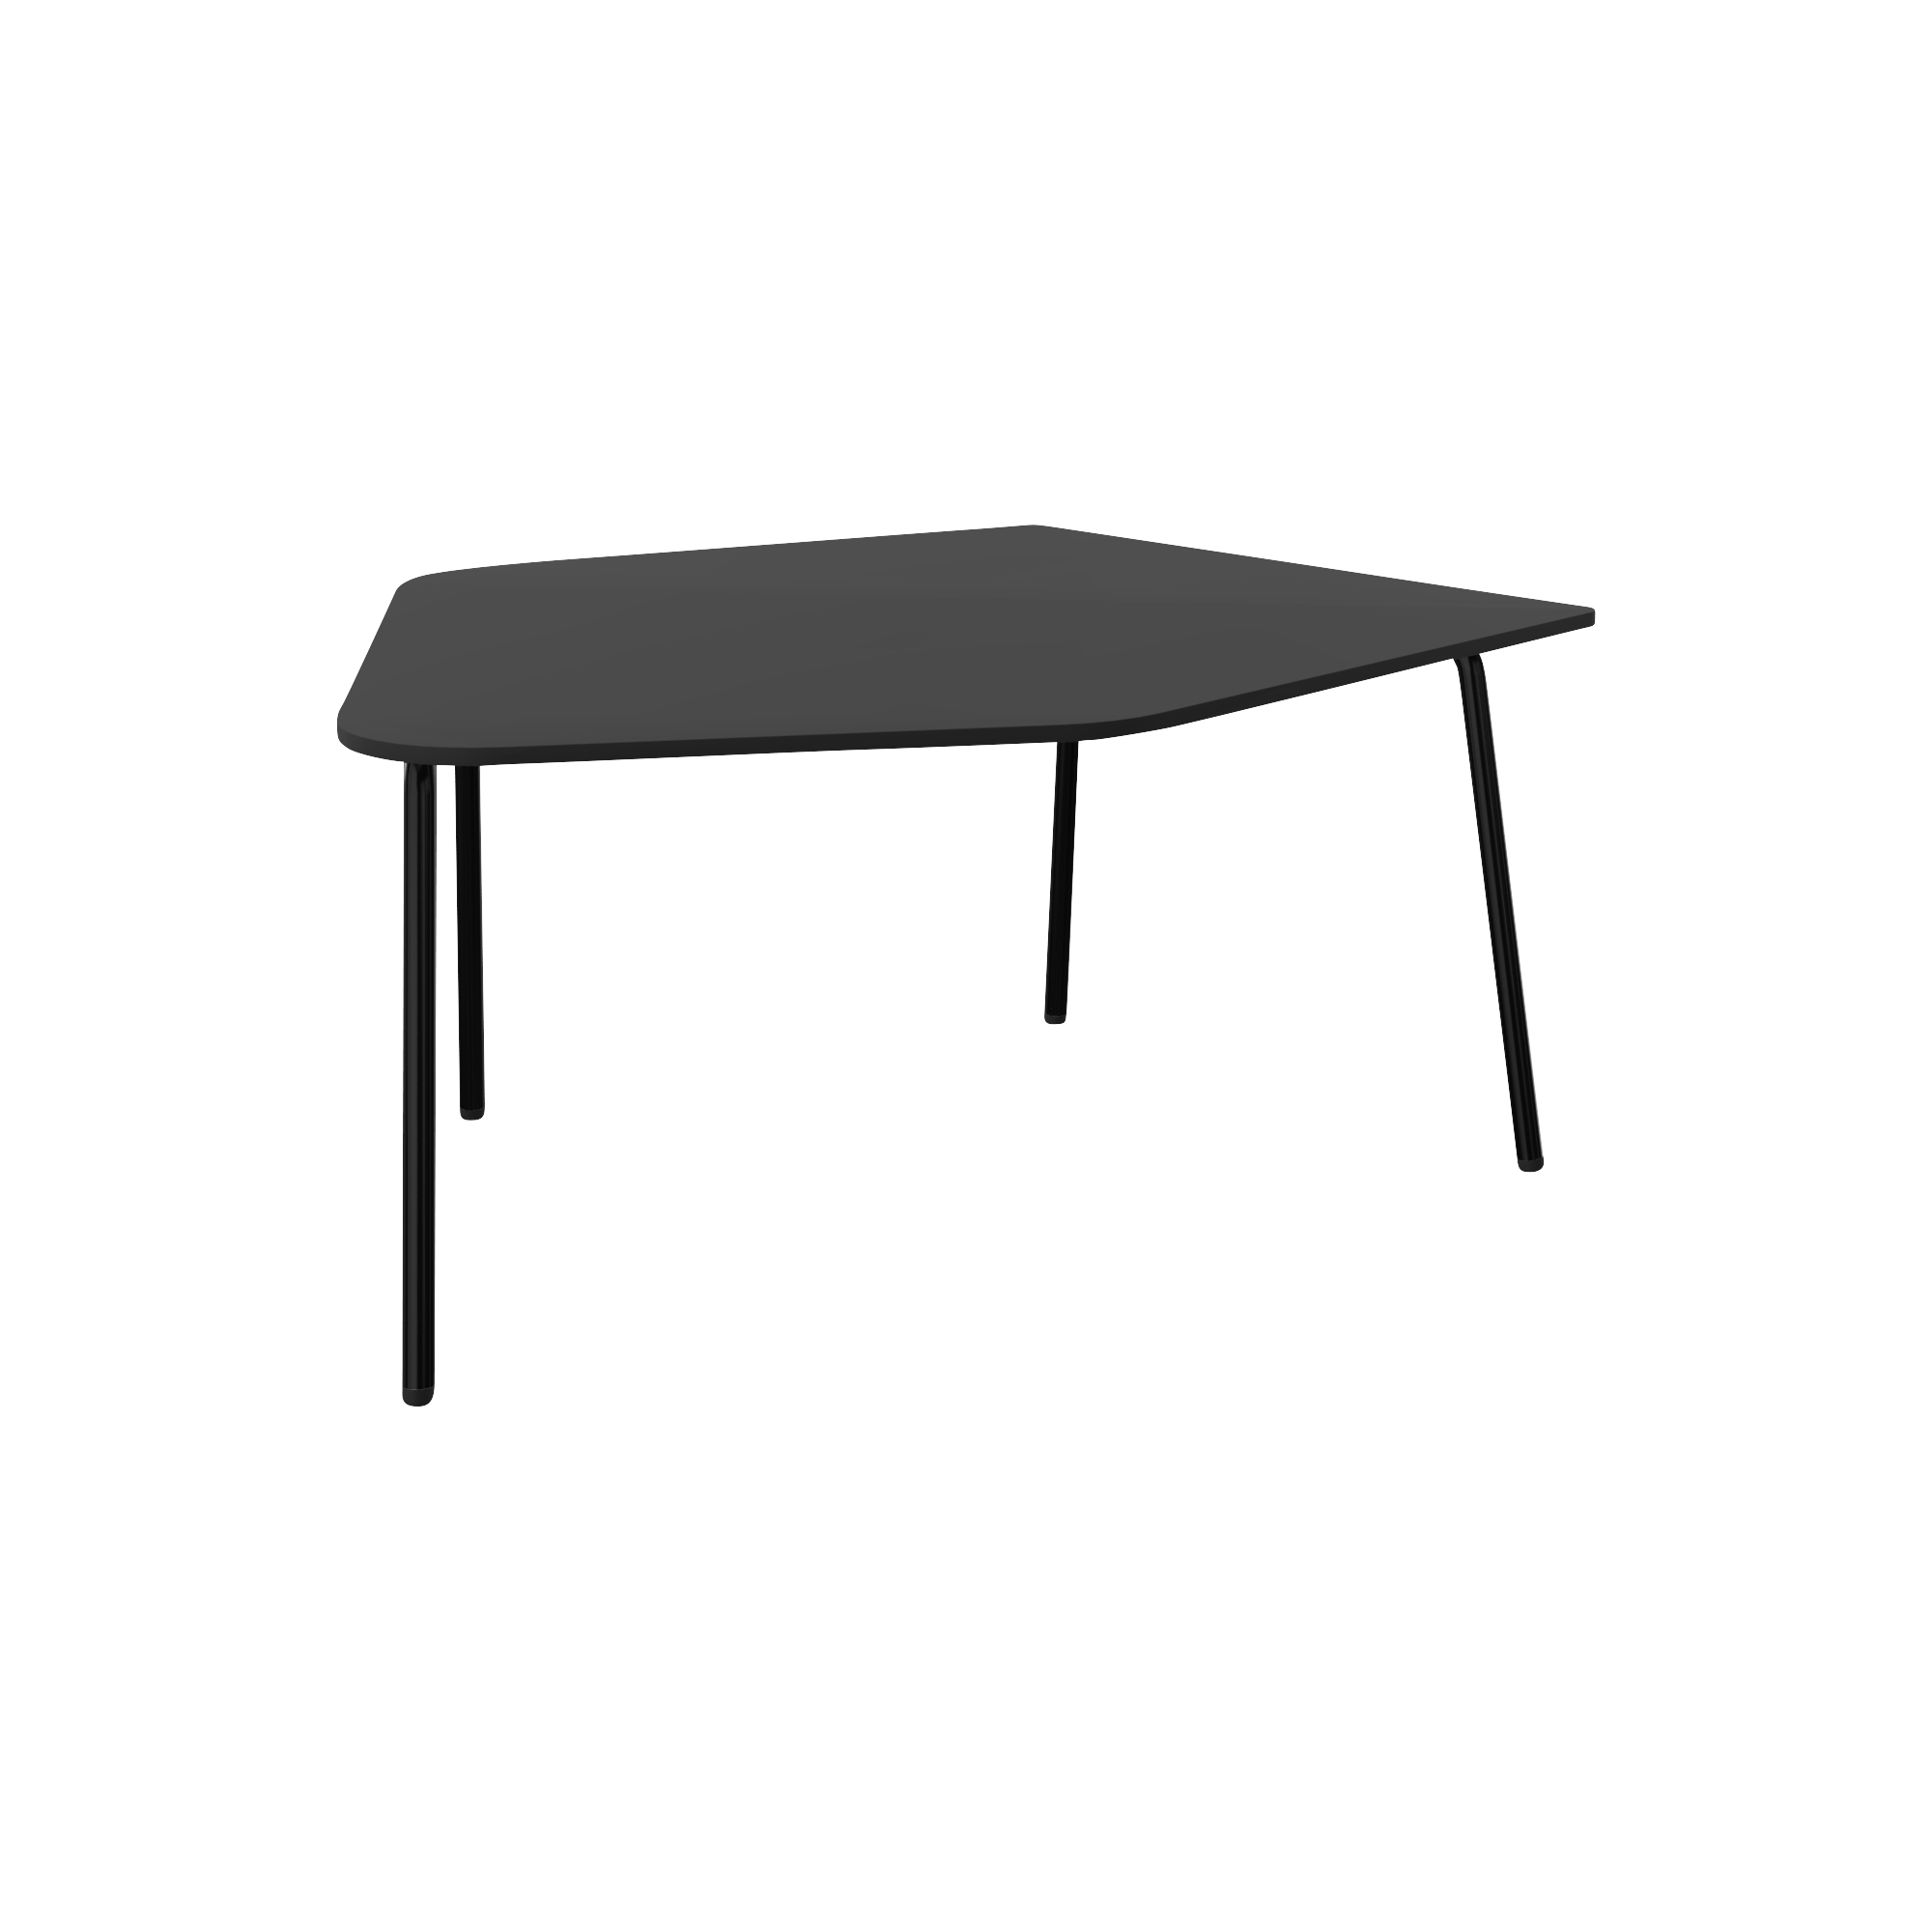 A black table with black legs